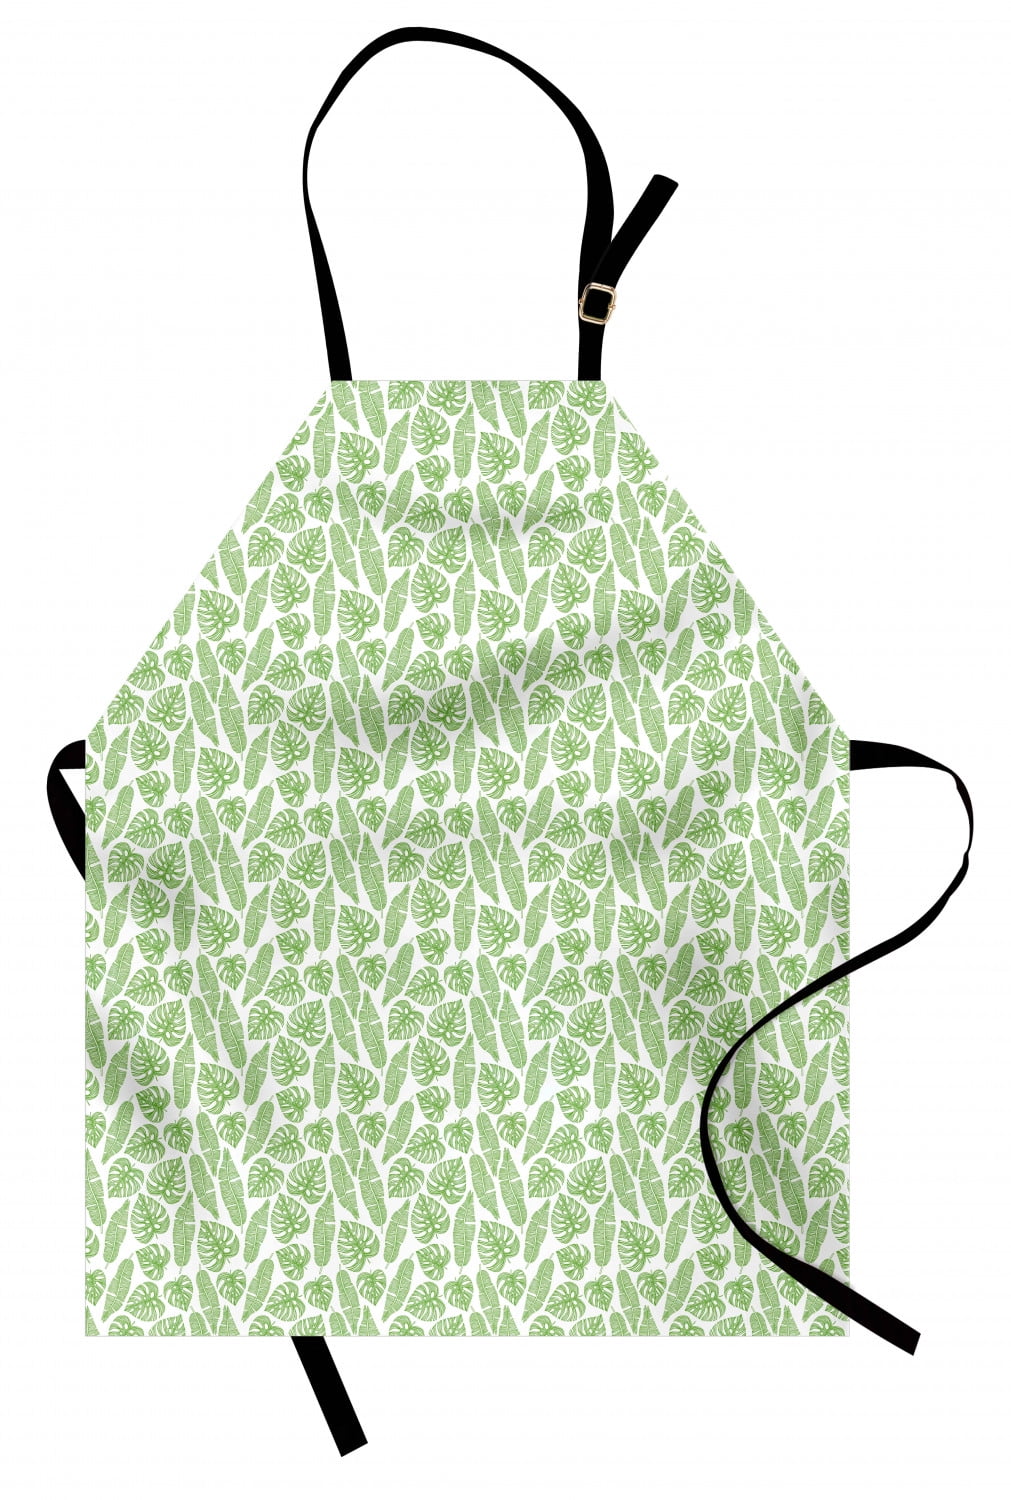 Details about   Ambesonne Standard Size Apron Bib with Adjustable Strap Gardening and Cooking 